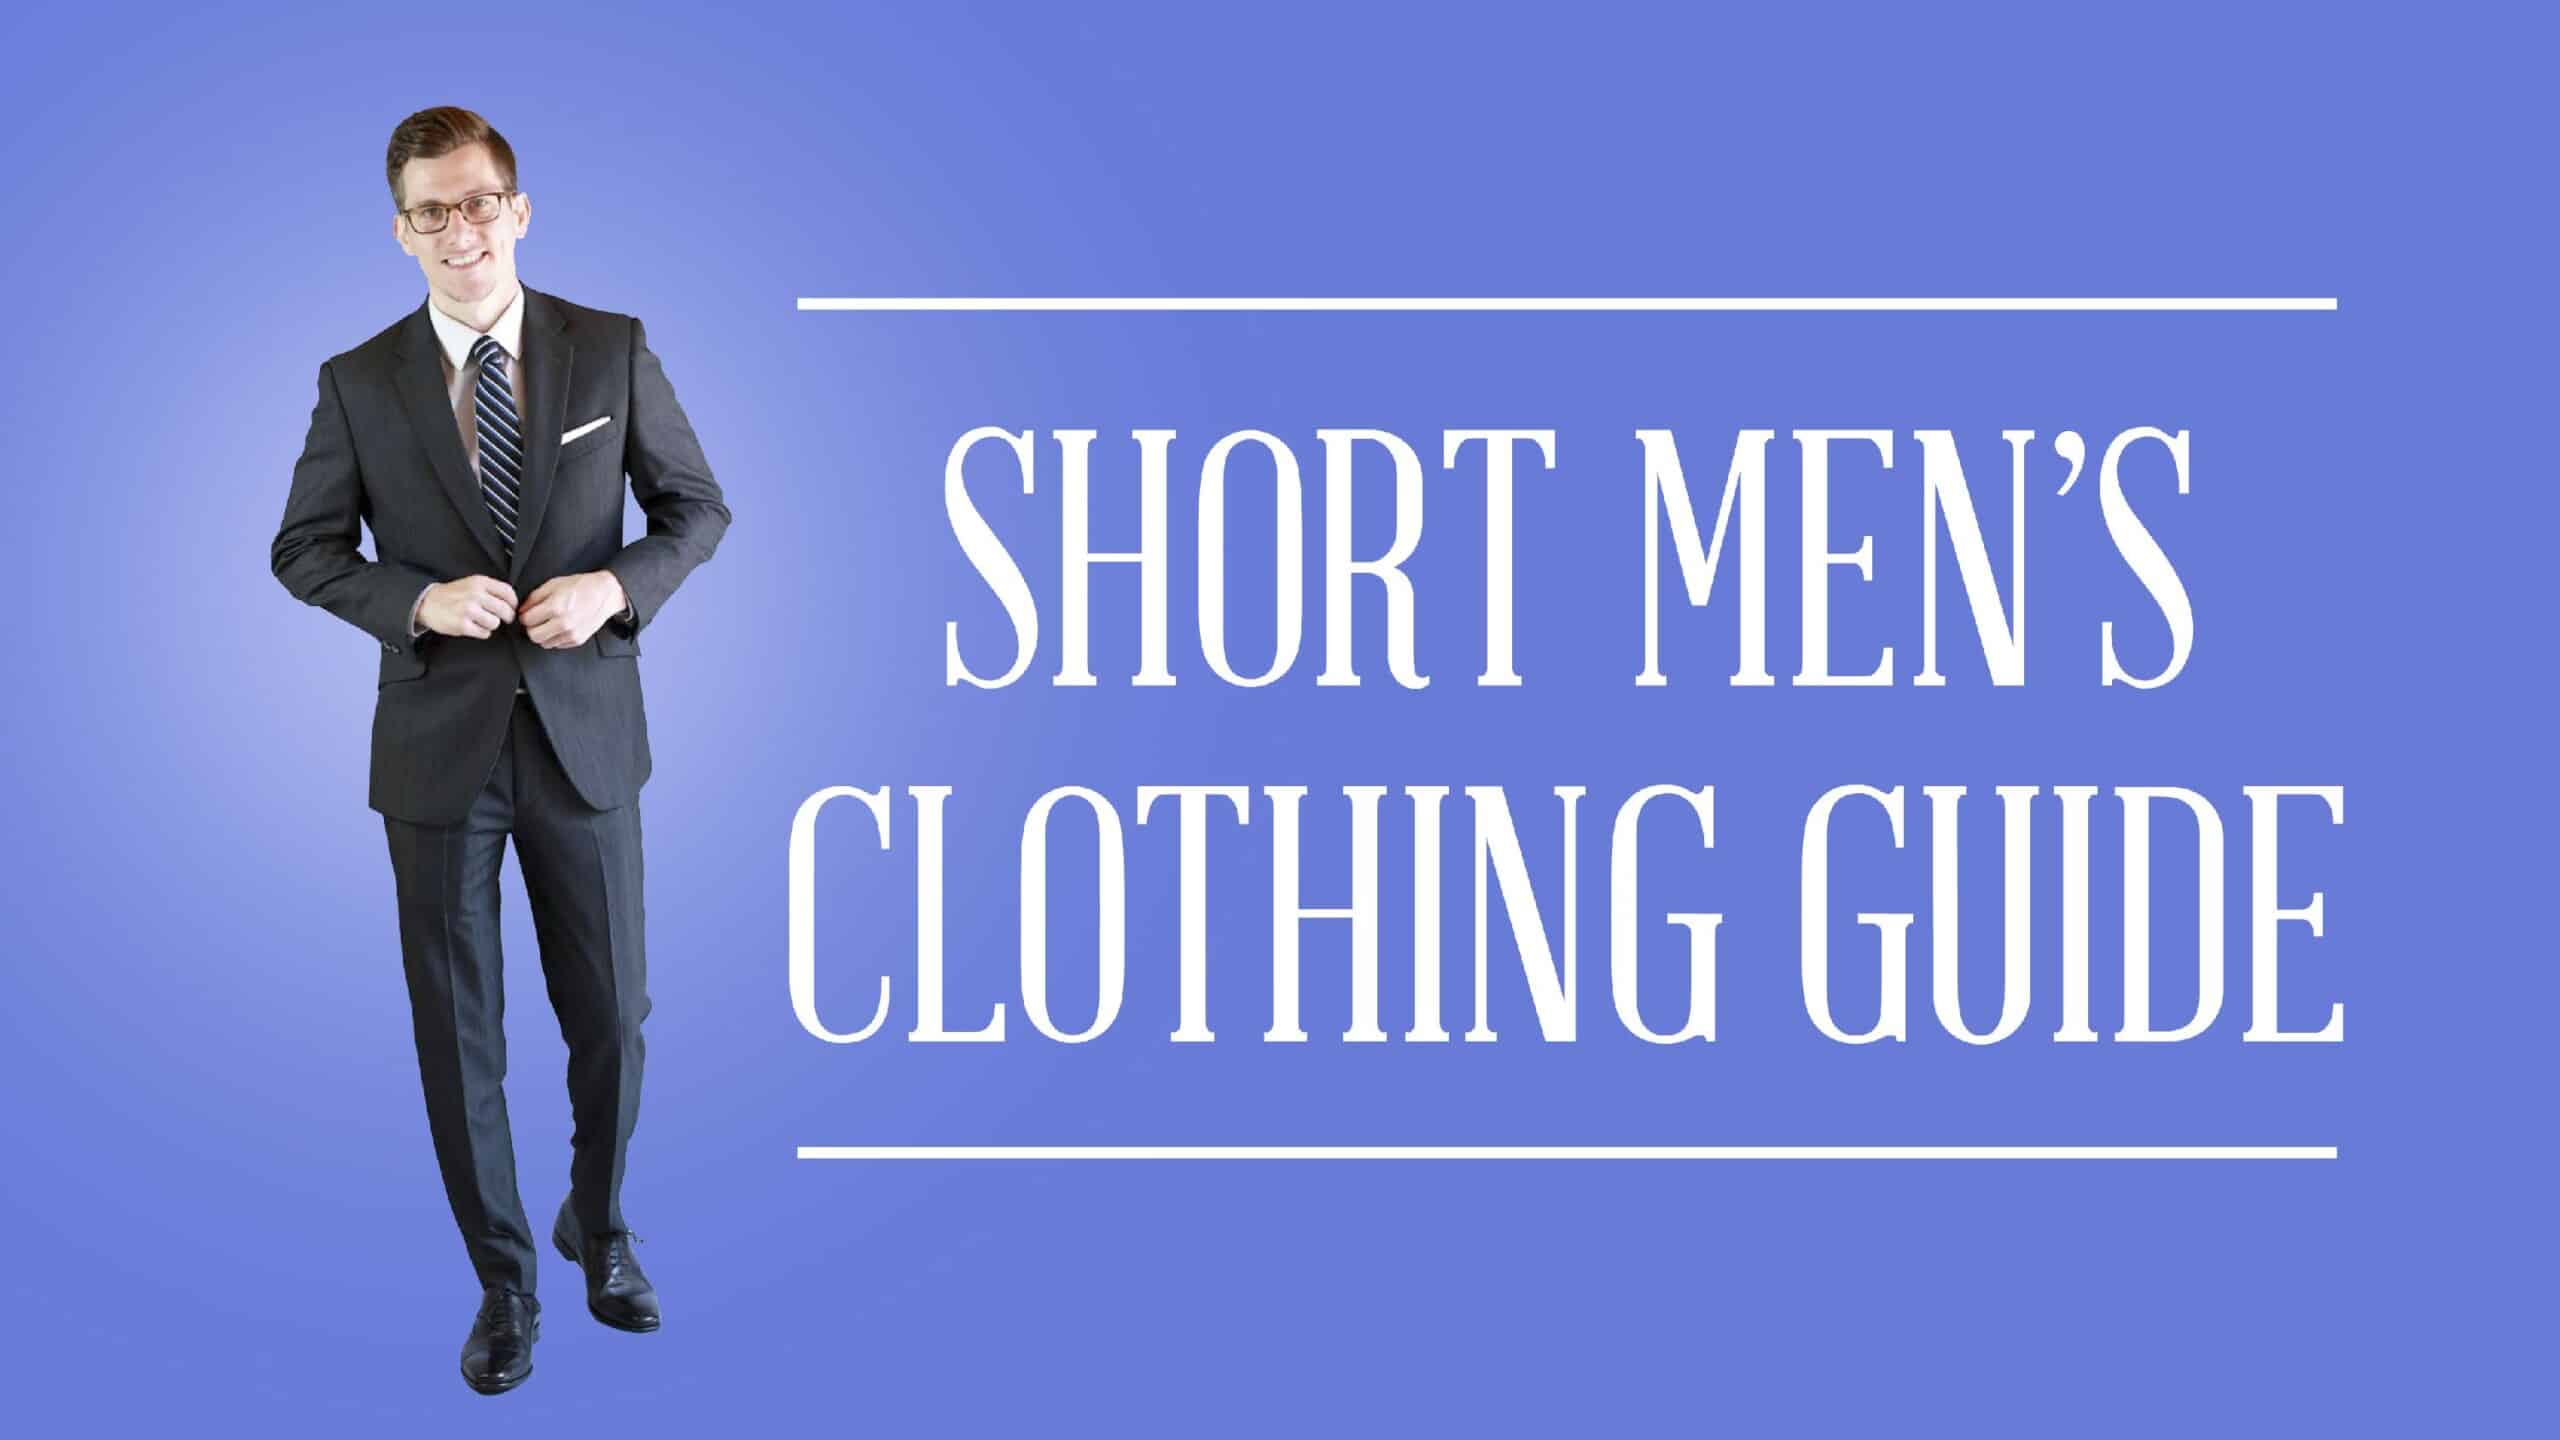 Obedient tuition fee member Style Tips For Short Men - How To Dress If You're Short